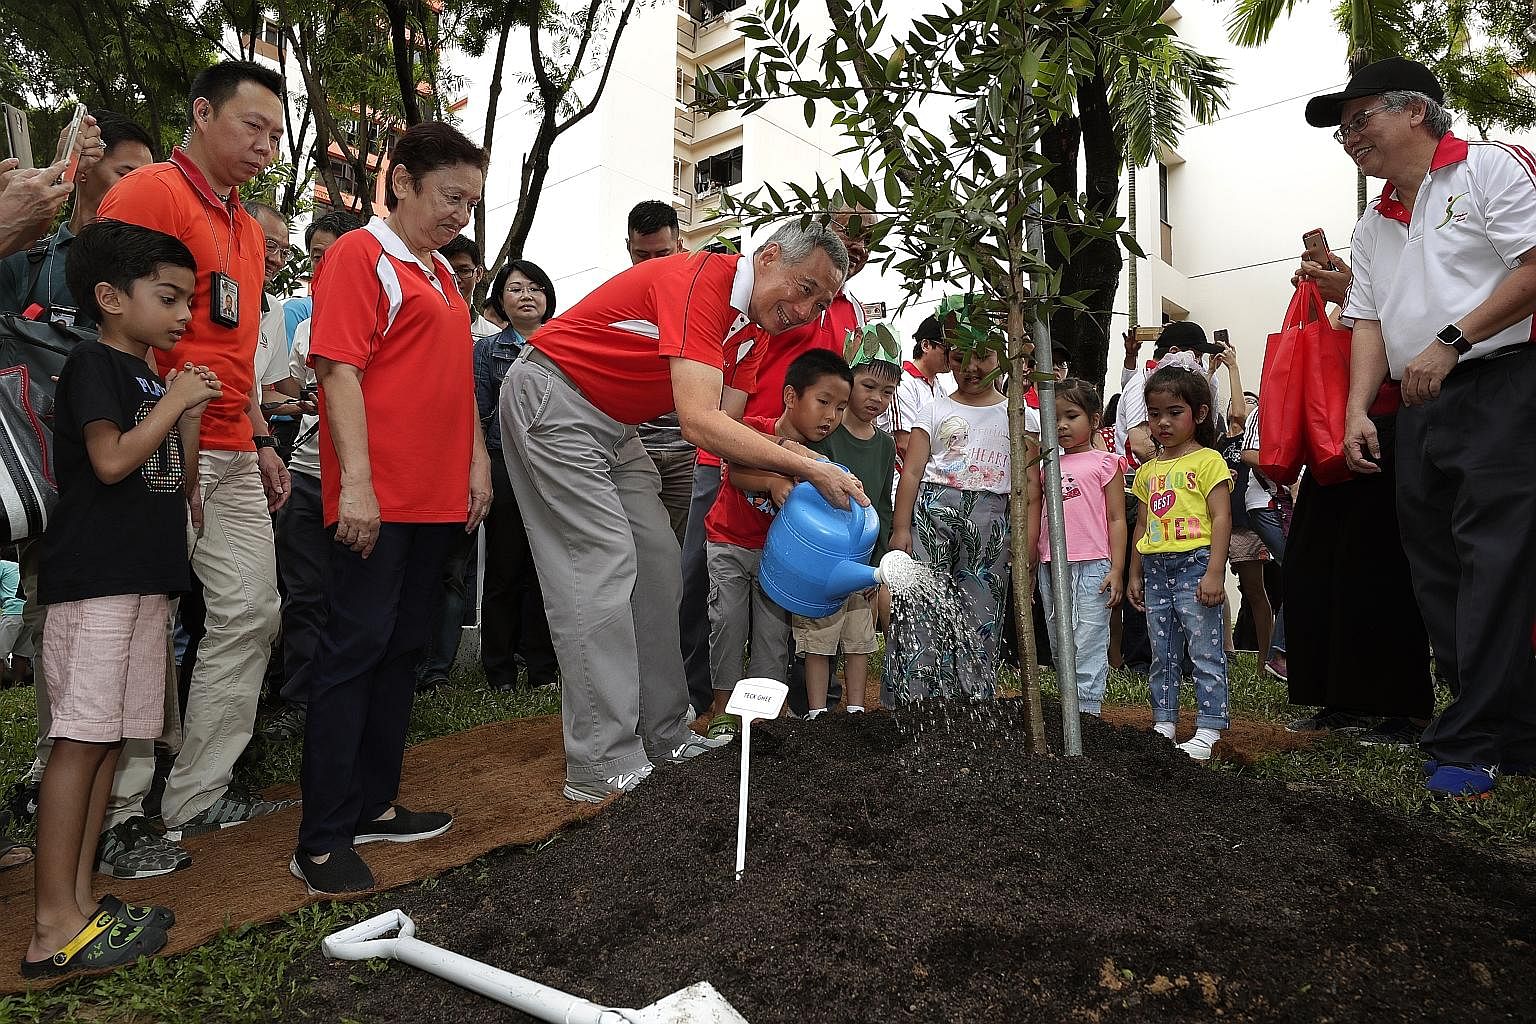 Prime Minister Lee Hsien Loong watering a tree he planted in front of Block 405A Fernvale Lane in Sengkang at an annual tree-planting event yesterday. 	He and his fellow Ang Mo Kio GRC MPs - Dr Koh Poh Koon, Mr Ang Hin Kee and Mr Gan Thiam Poh - as w